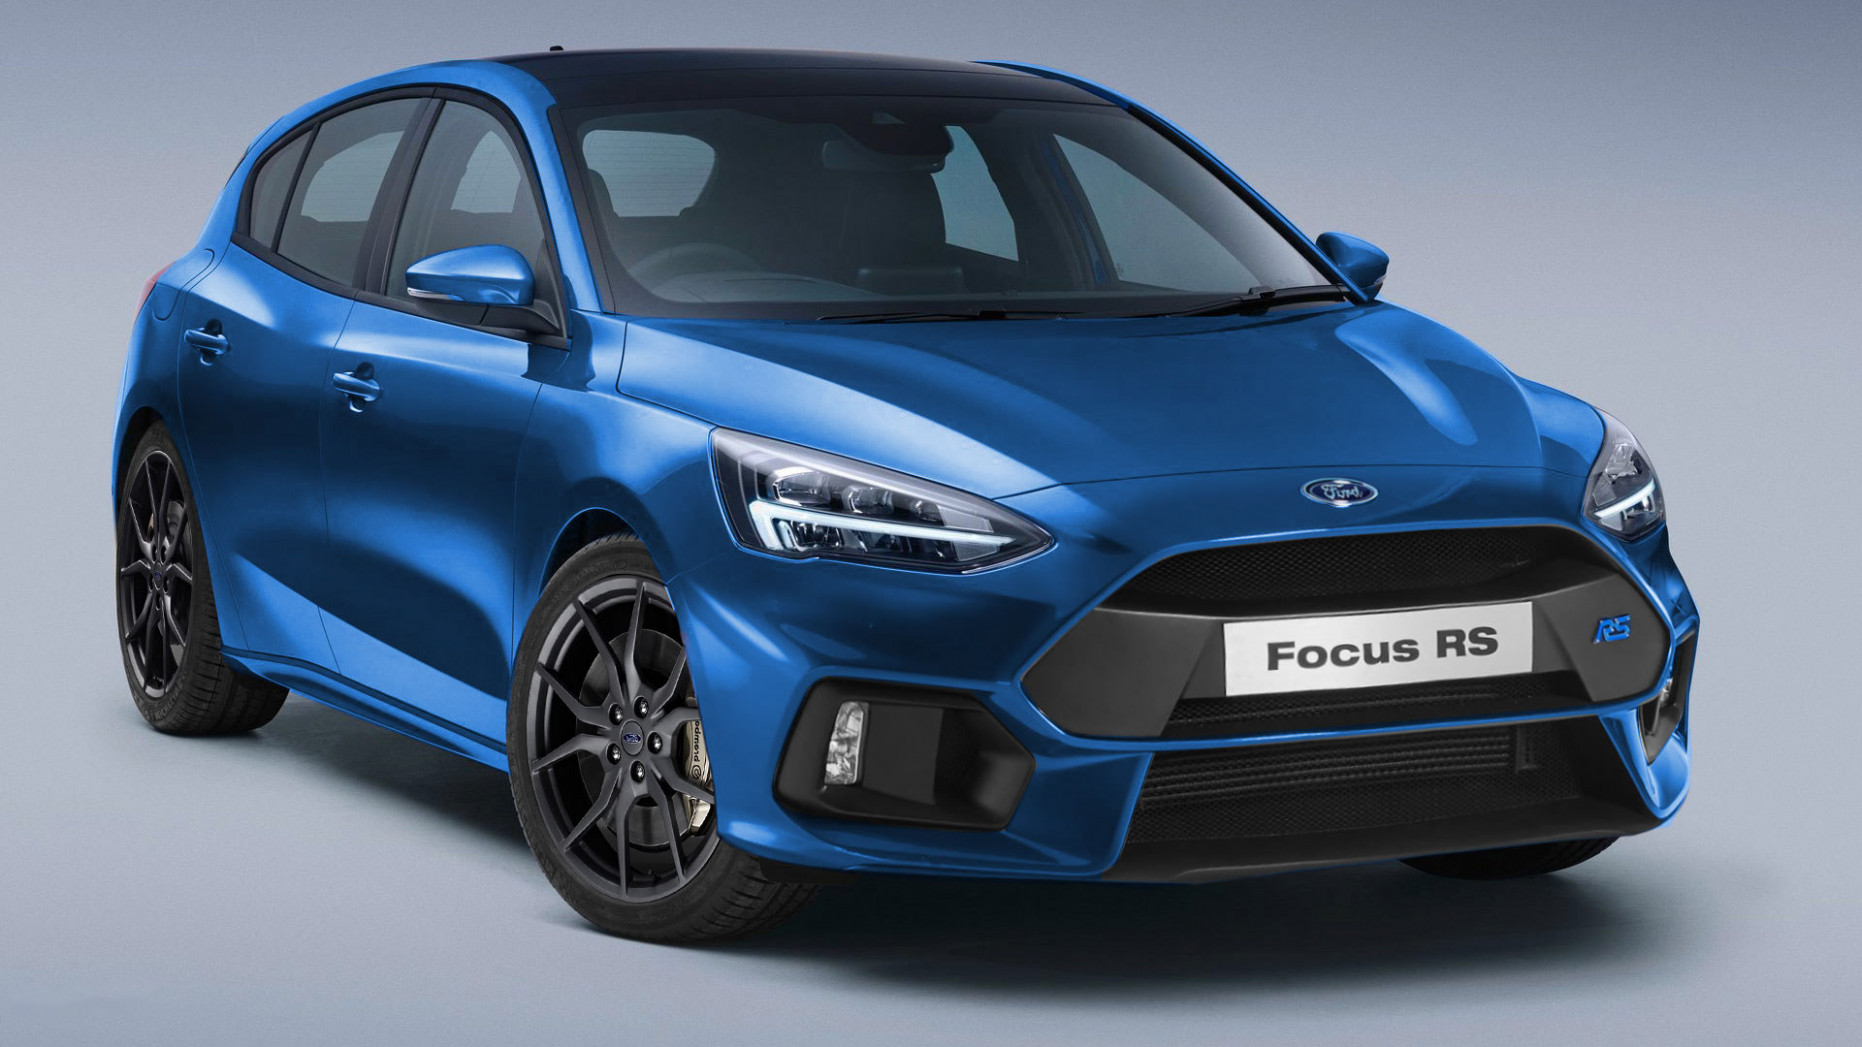 Ford Reportedly Ends Focus RS Development Program Due To Emission